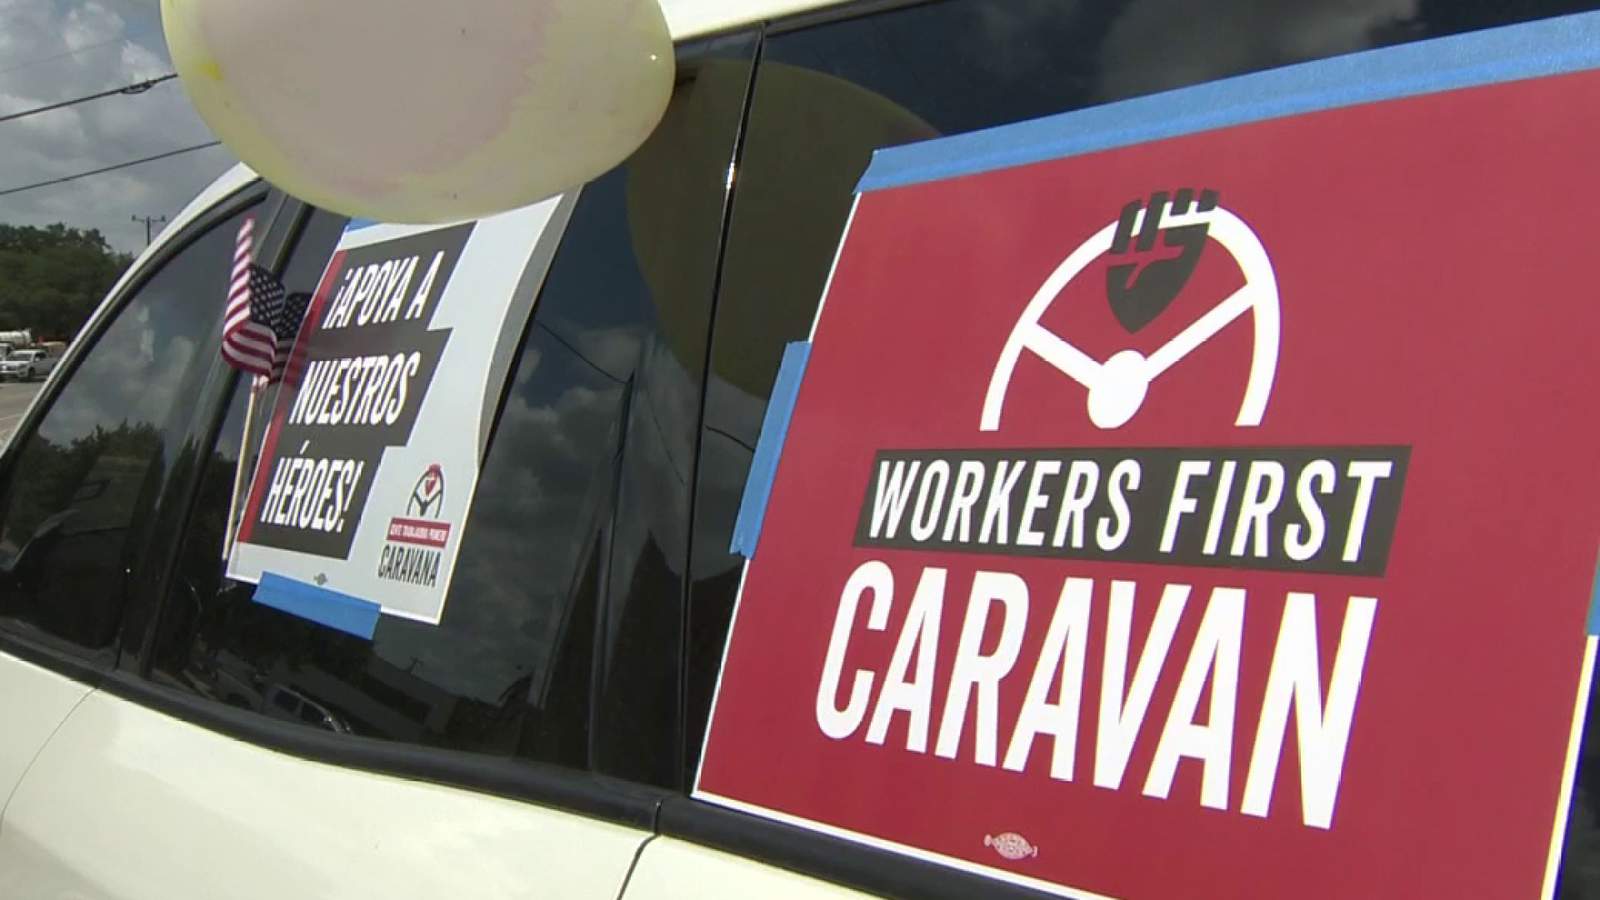 Group thanks Congress members from San Antonio for defending workers’ rights